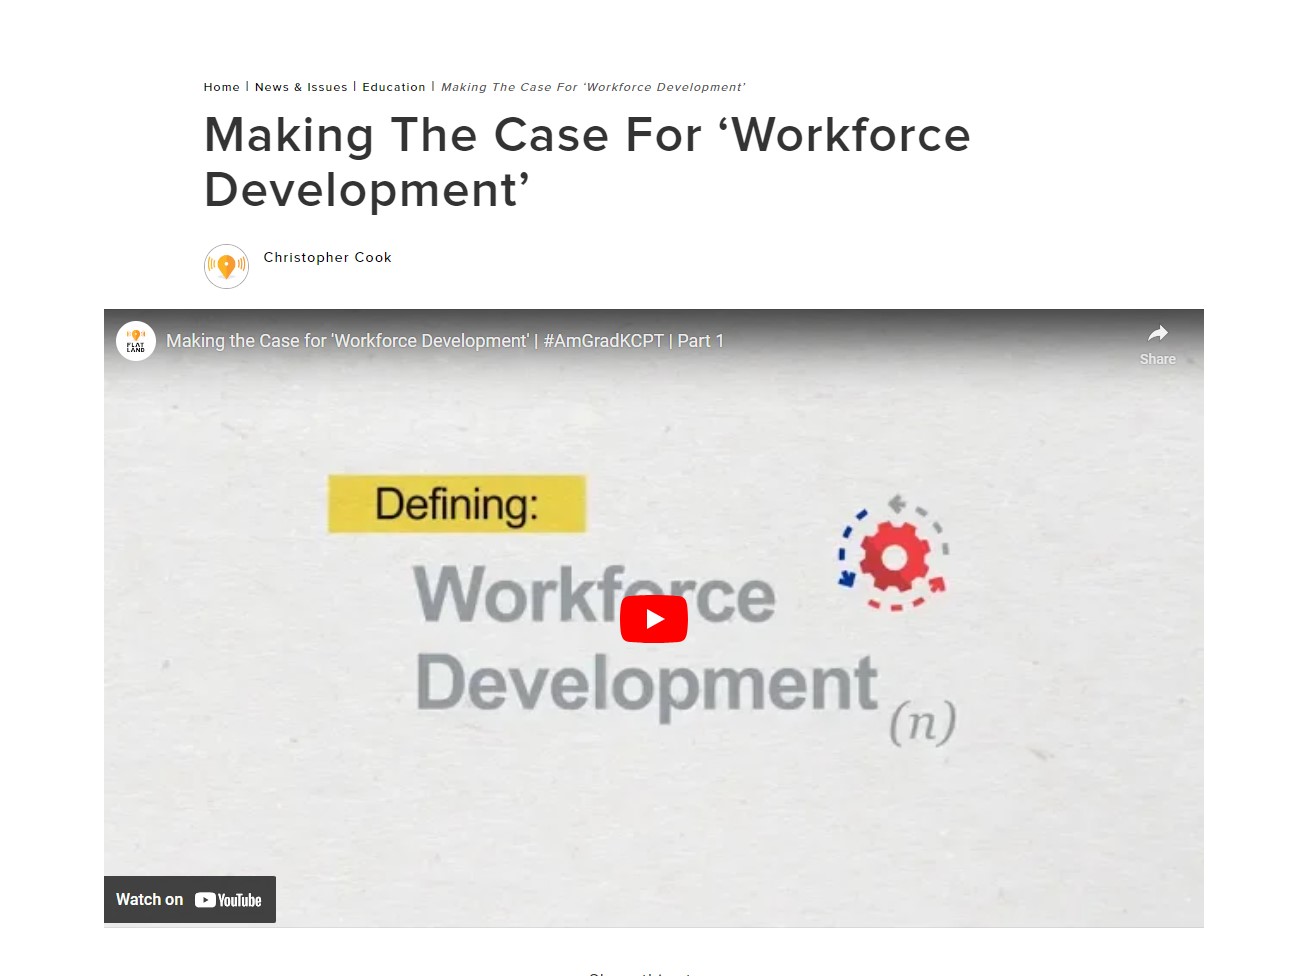 Making the Case for Workforce Development Image